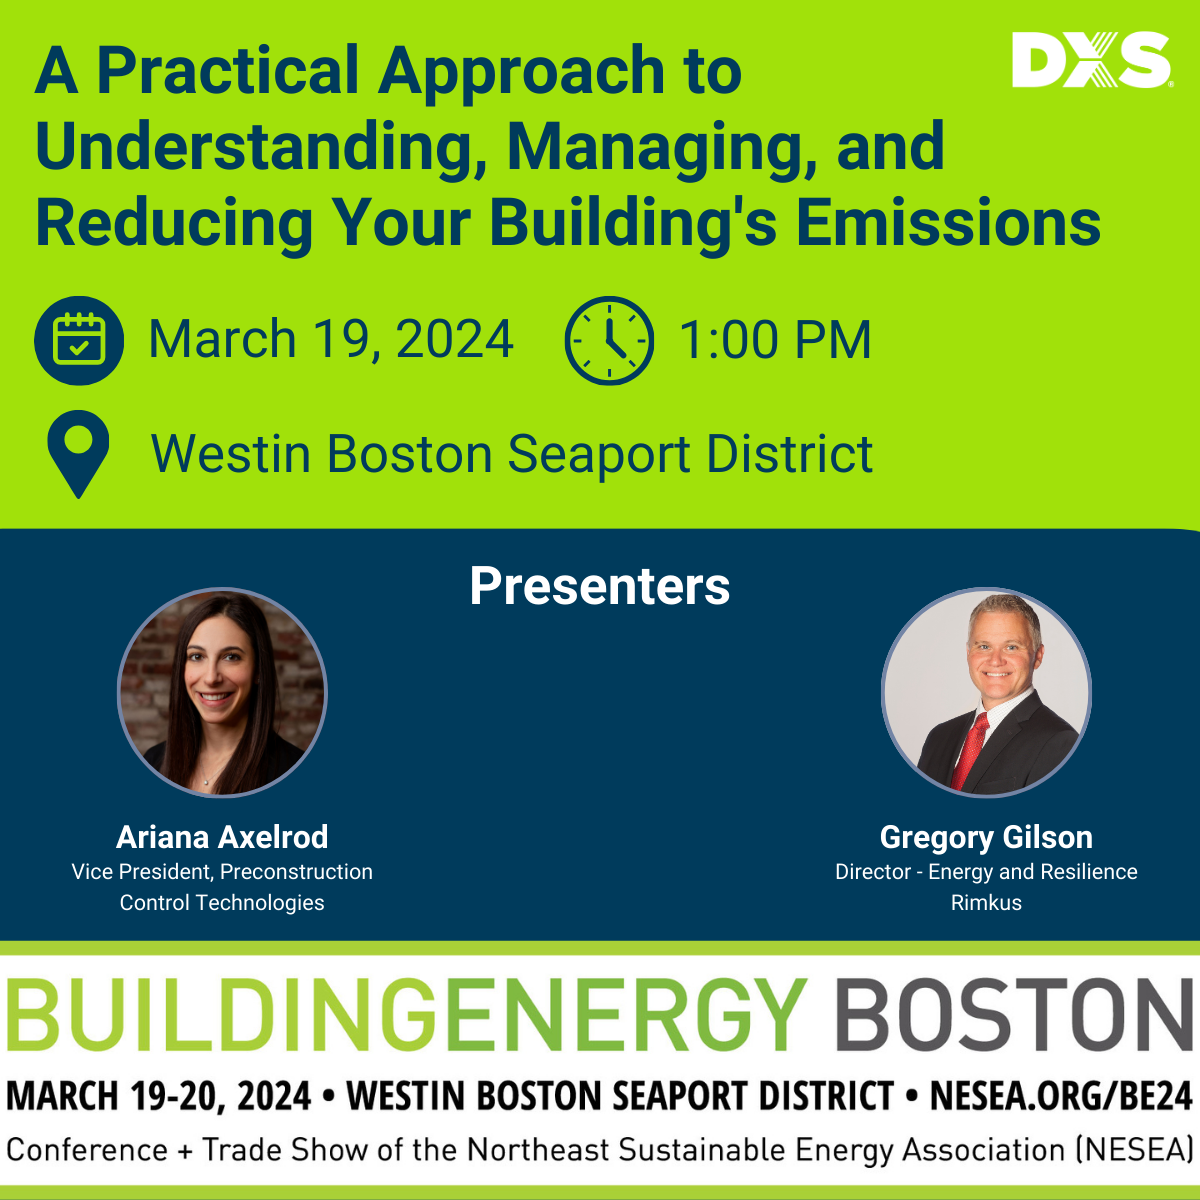 A Practical Approach to Understanding, Managing, and Reducing Your Building's Emissions Graphic